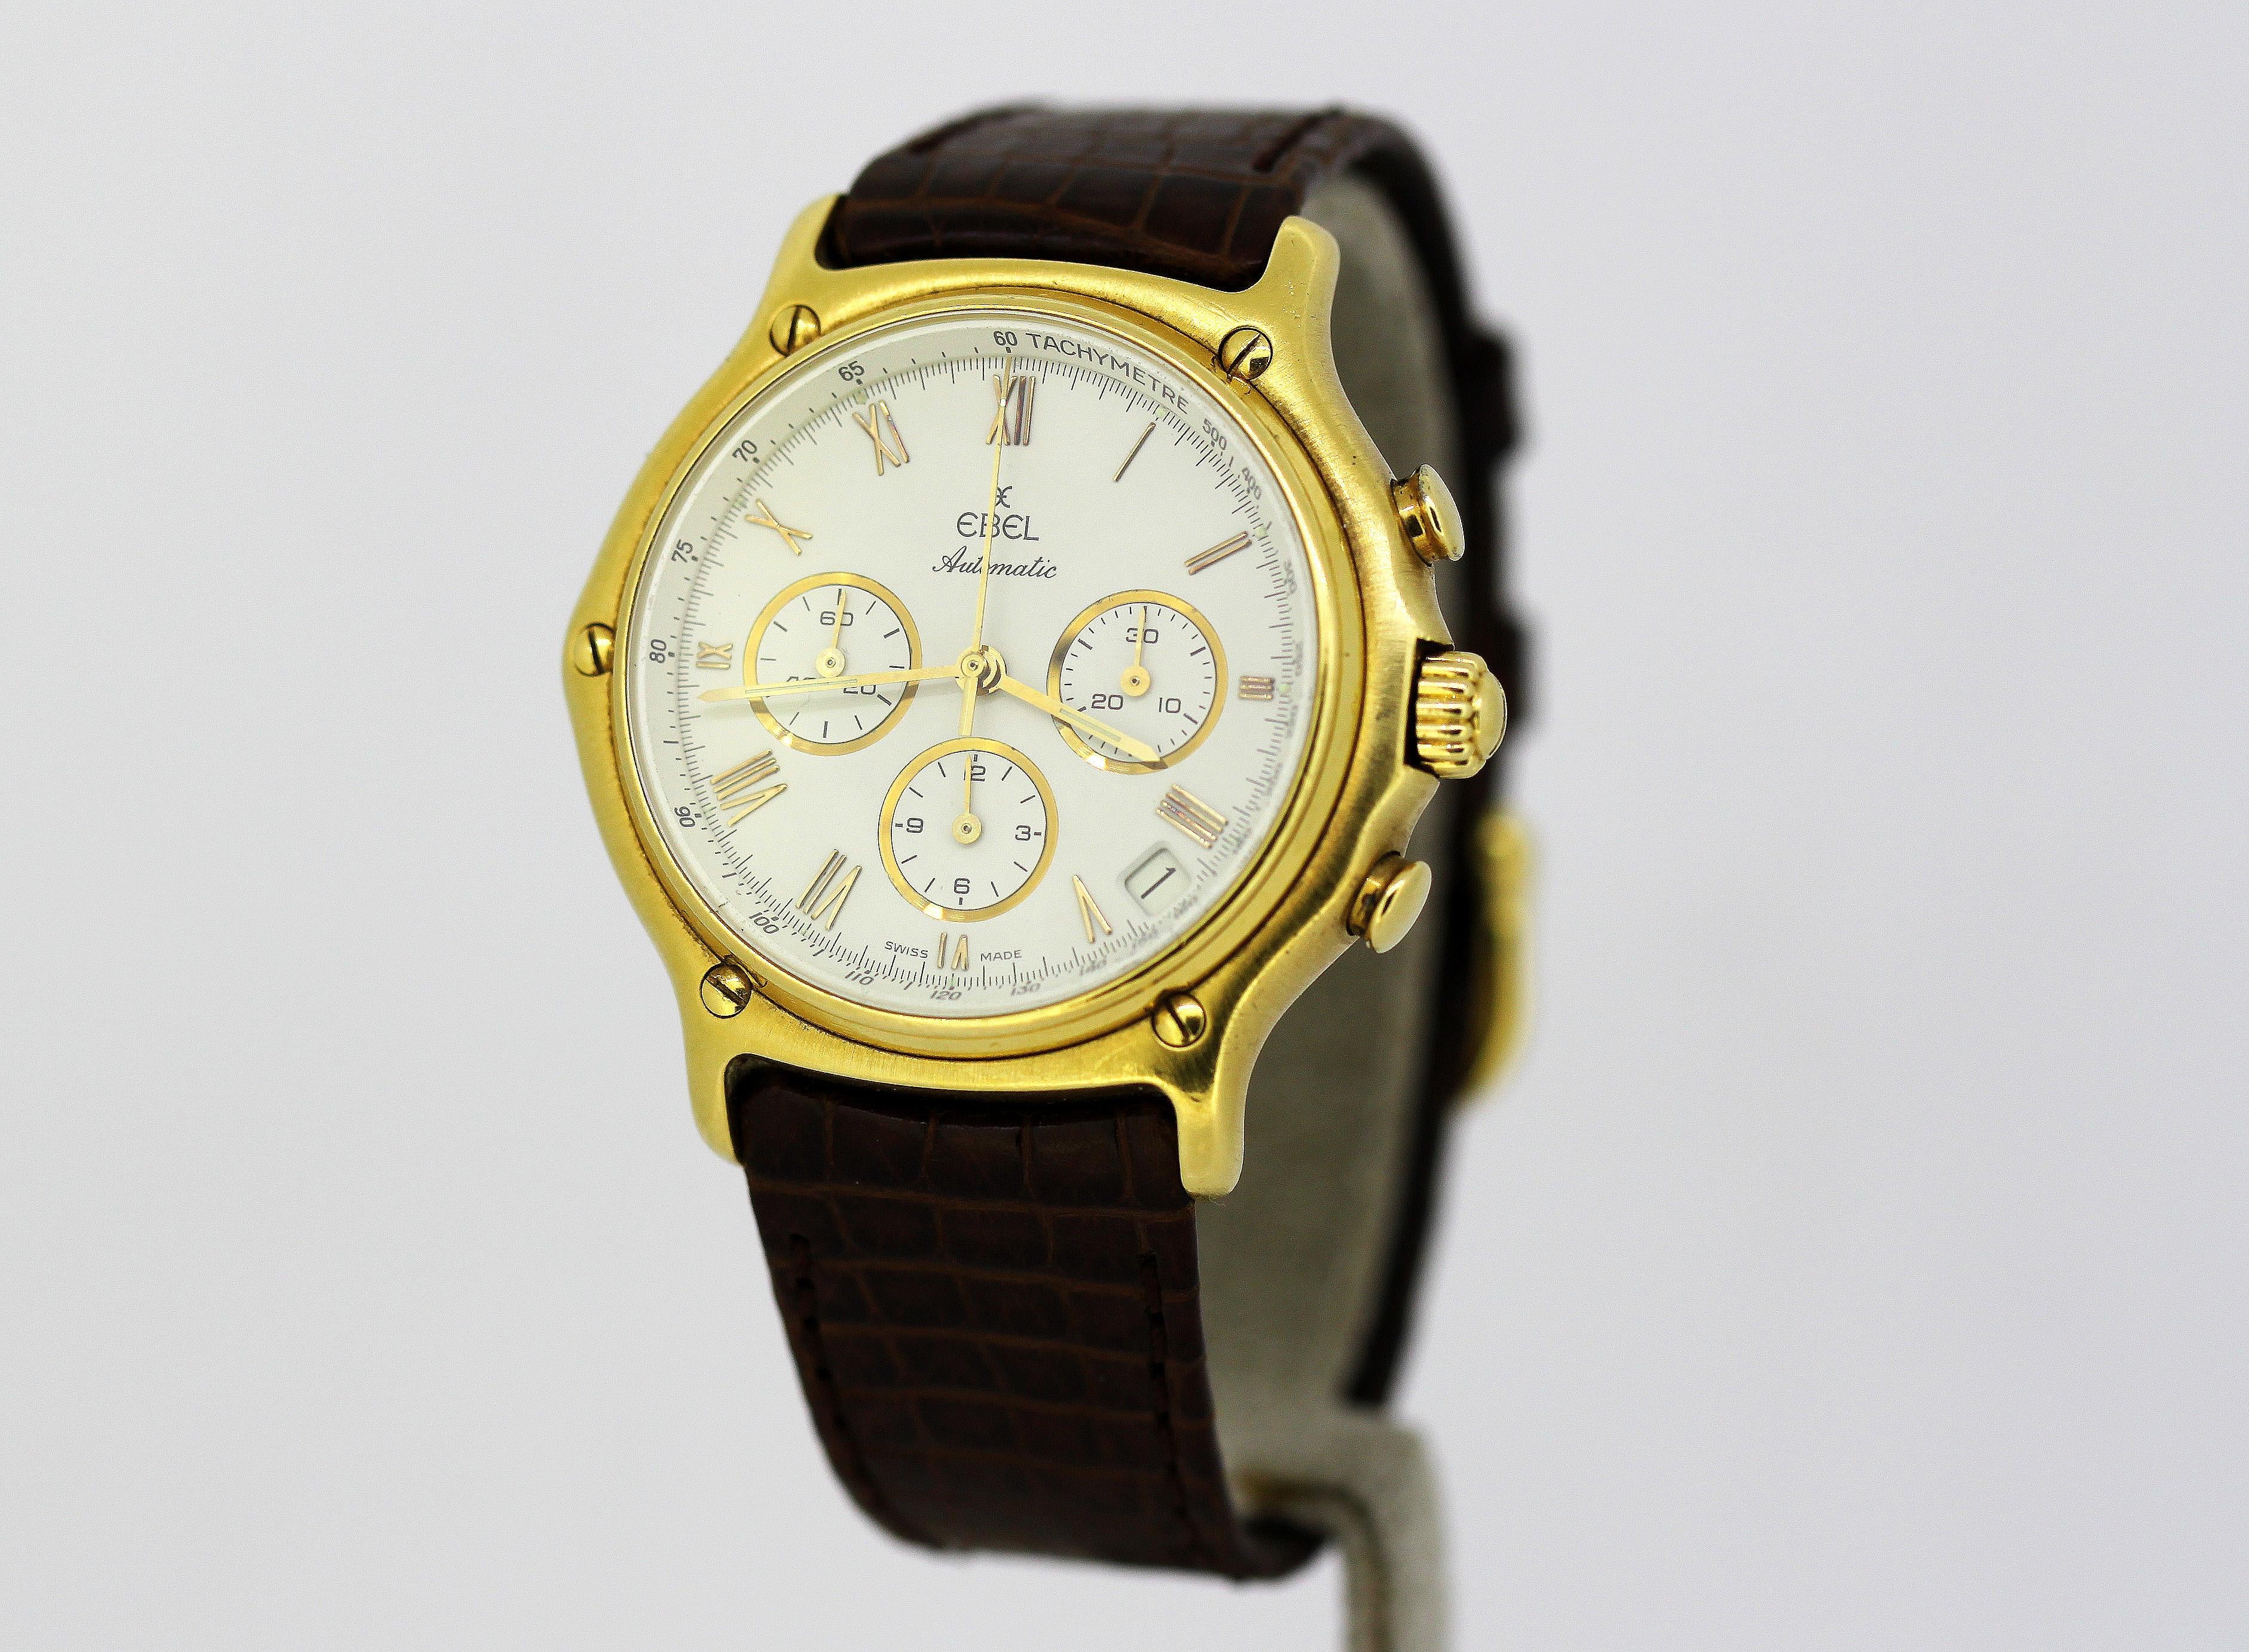 Ebel 1911 Men's Chronograph watch in 18kt gold, Circa 1990's
Comes with full set, including boxes, manual & tags.

Gender: Men's
Case Diameter : 38 mm
Movement: Automatic
Watchband Material: Leather
Case material: 18kt gold
Display